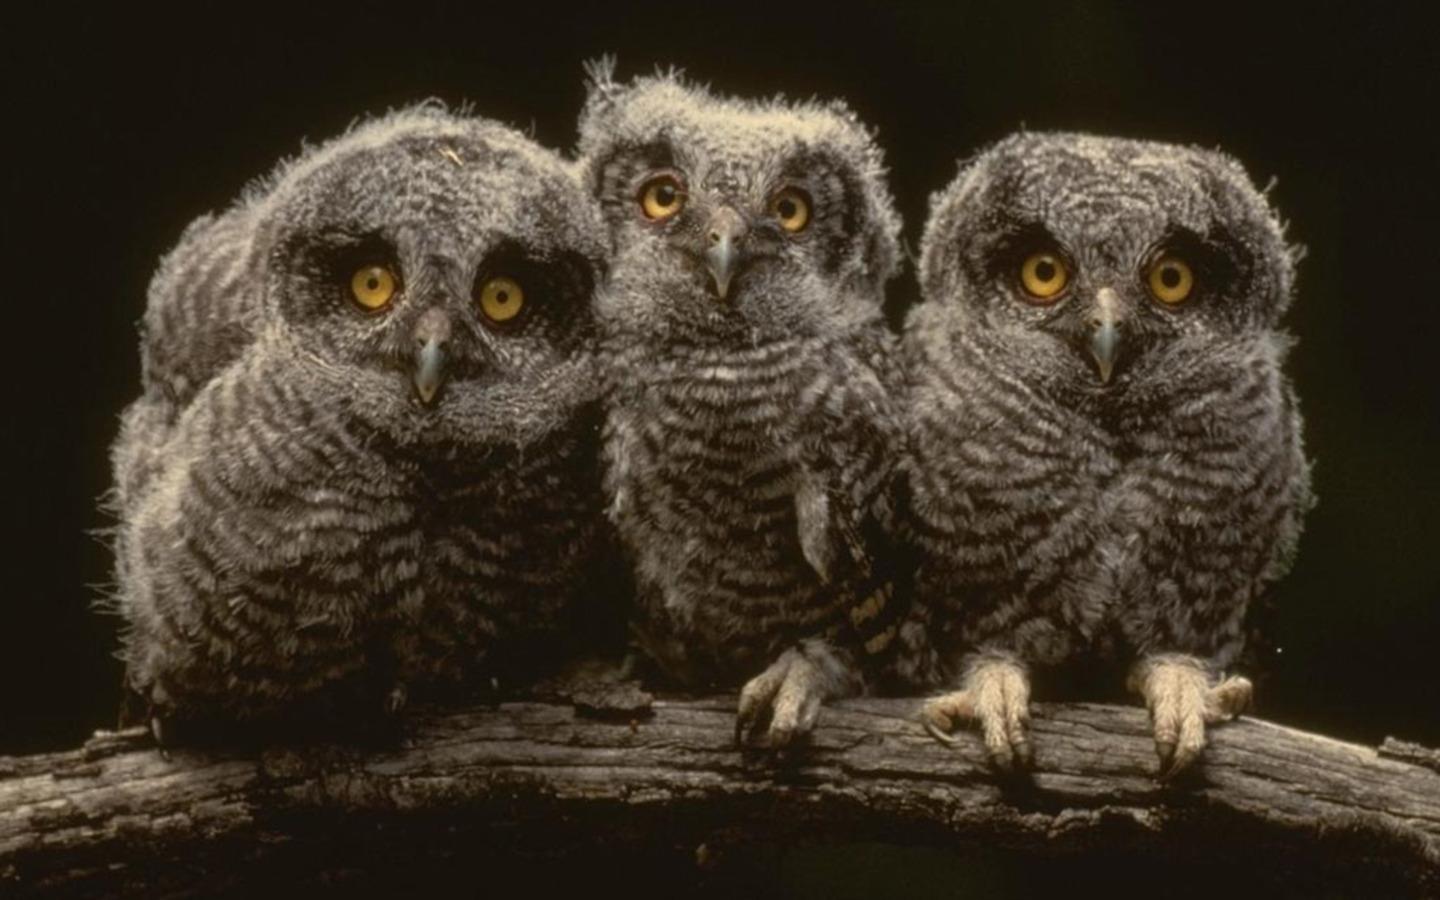 Young Owls Wallpaper photo and wallpaper. All Young Owls Wallpaper